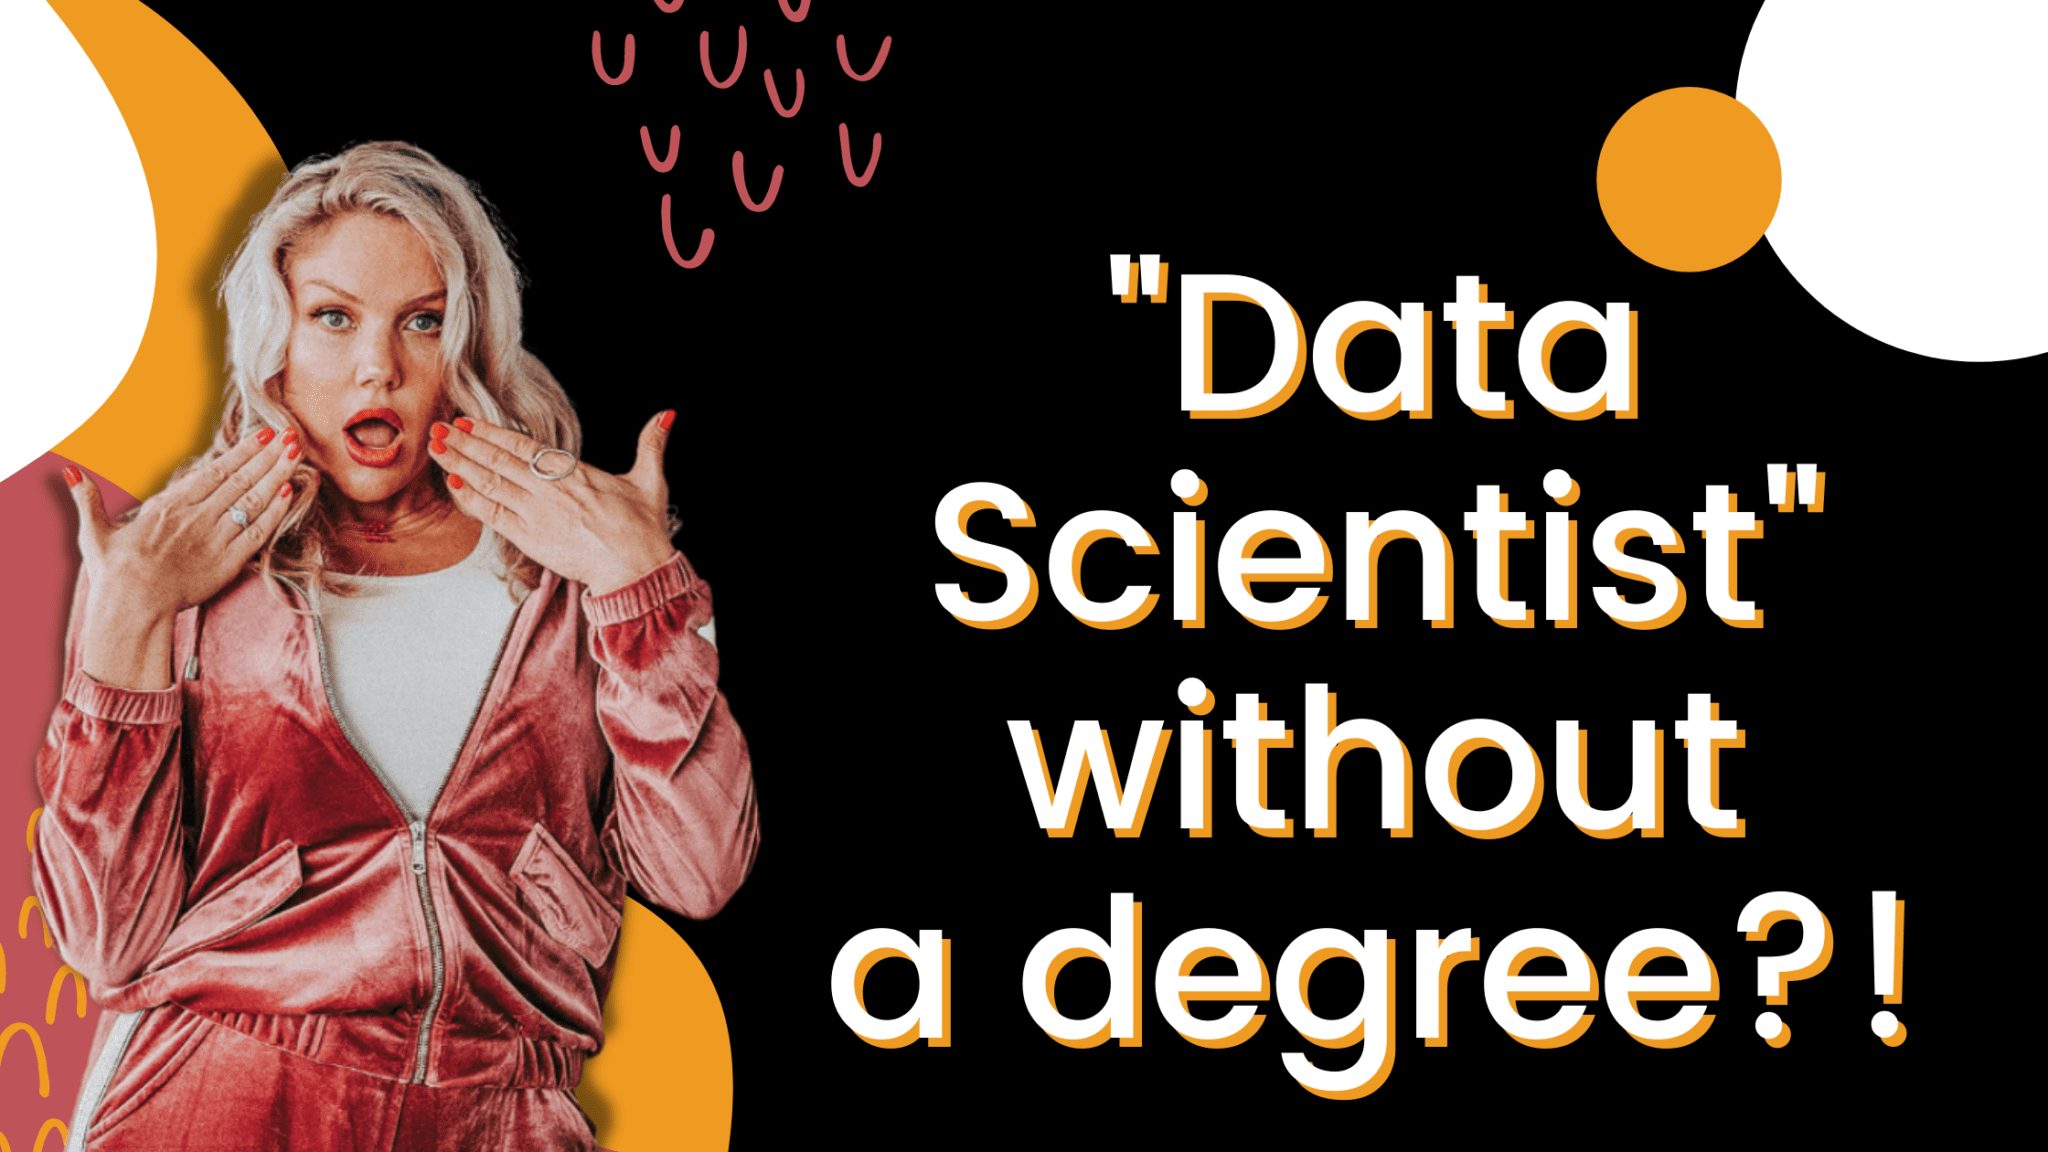 can you become a Data Scientist without a degree